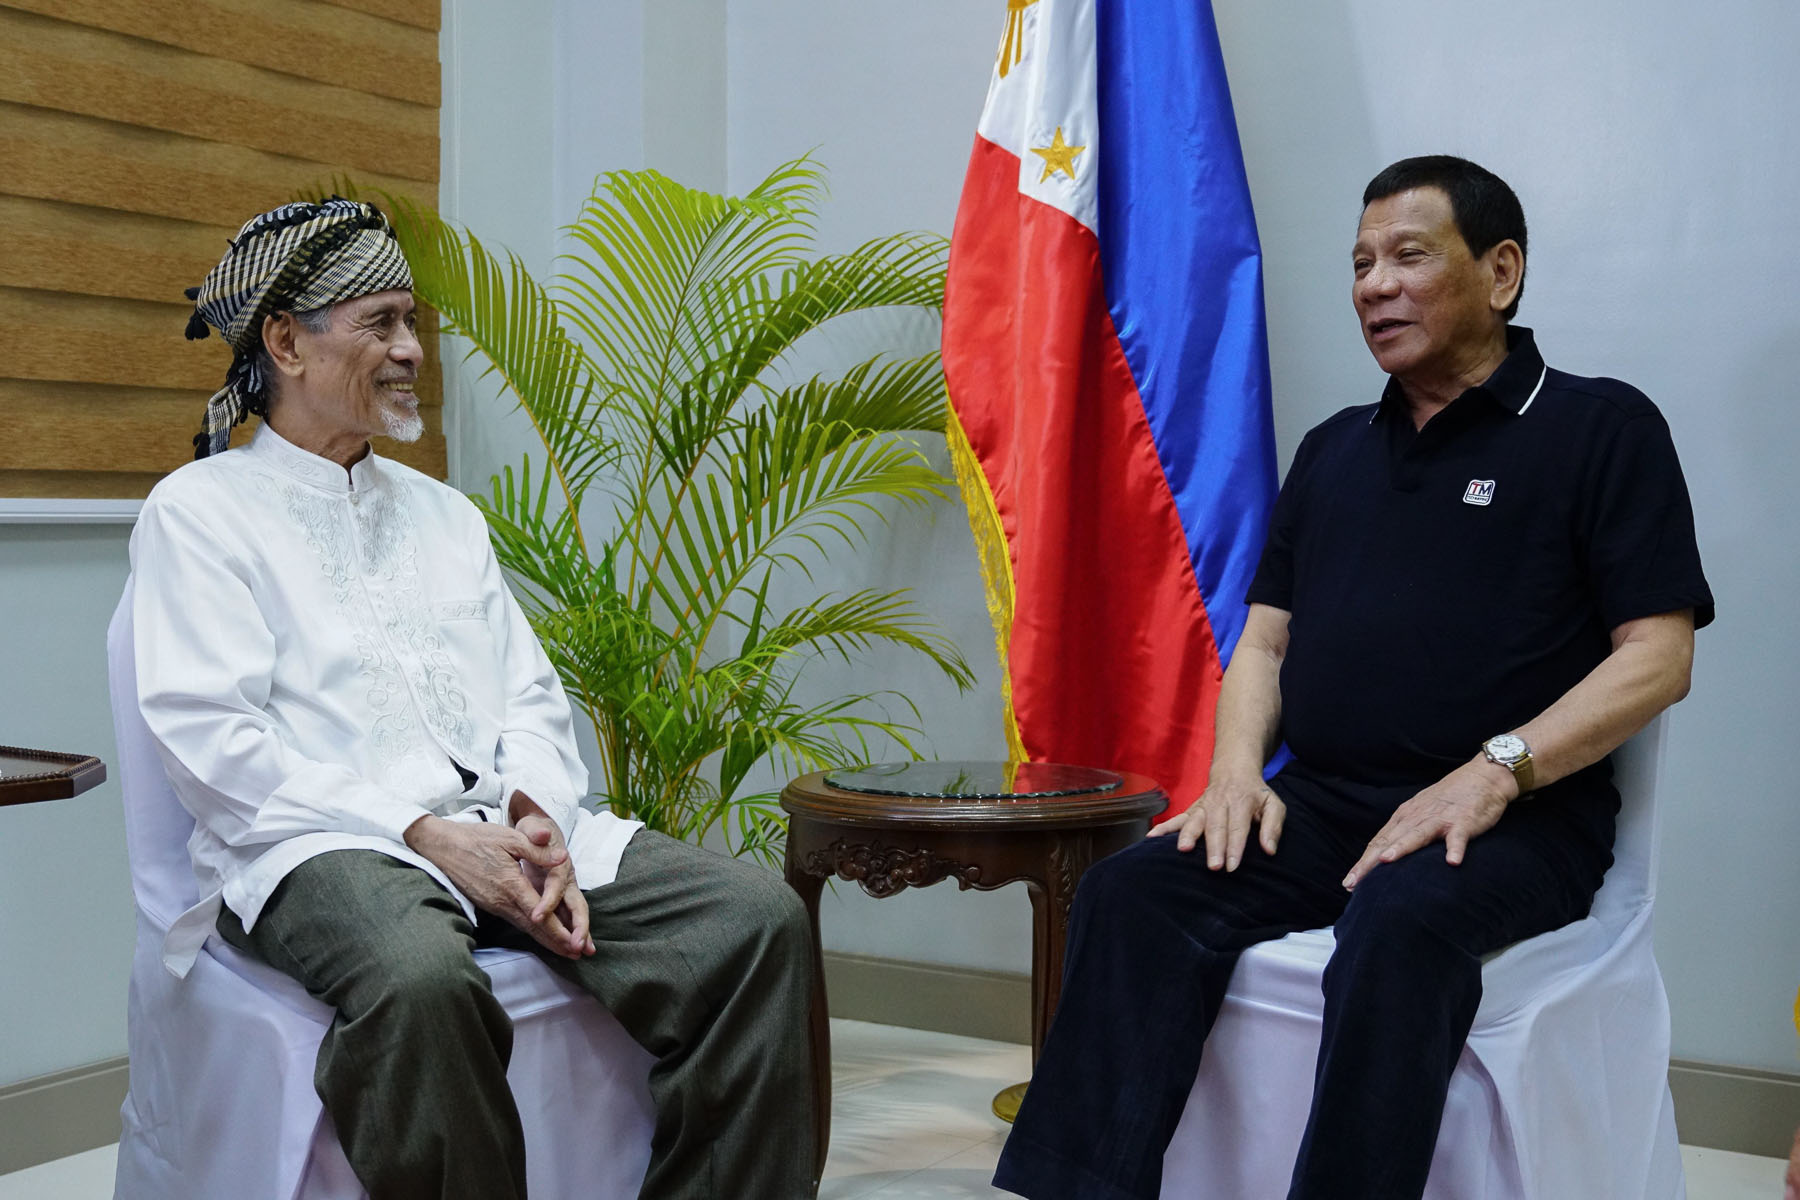 Palace: Nothing wrong with Duterte calling court to let Misuari travel abroad